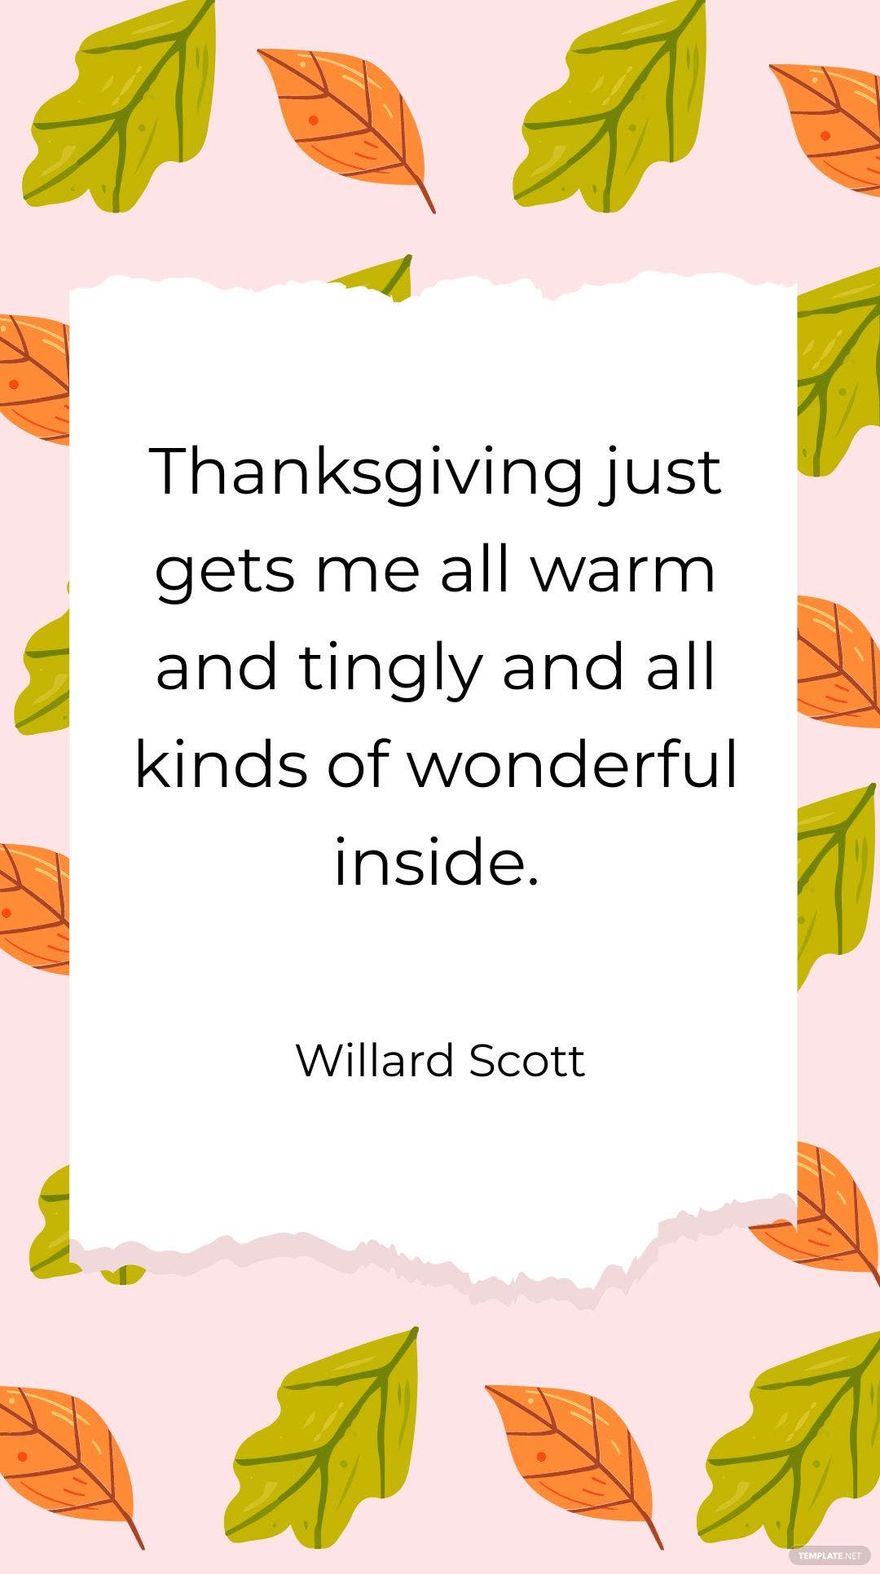 Willard Scott - Thanksgiving just gets me all warm and tingly and all kinds of wonderful inside.